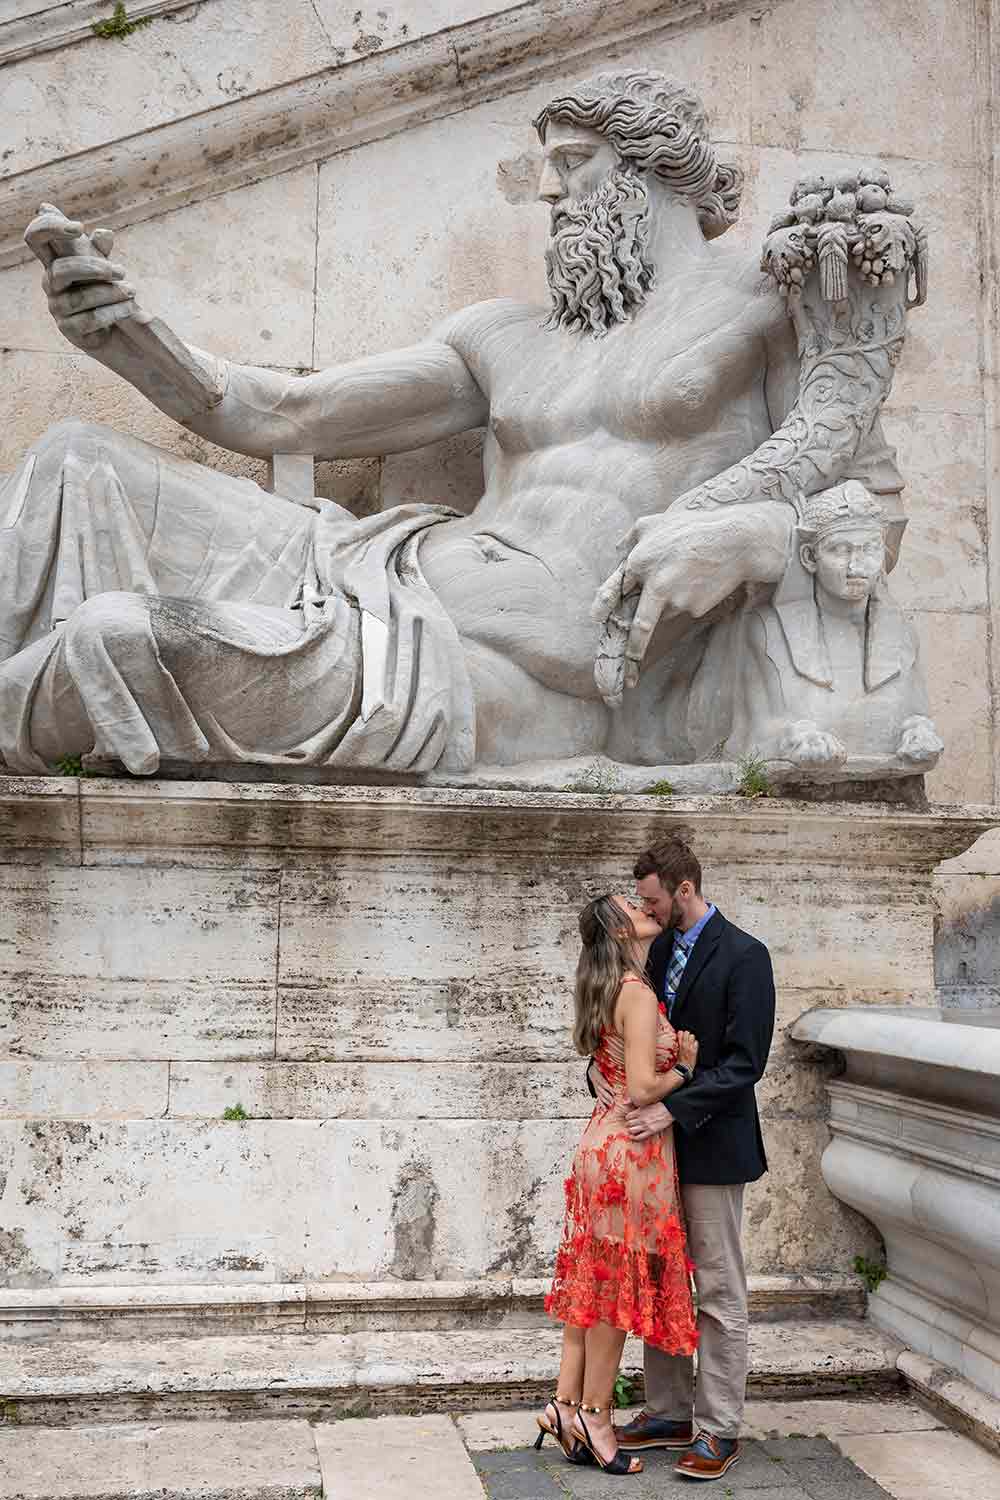 Kissing under a large marble statue found in the main square during a Rome photoshoot 